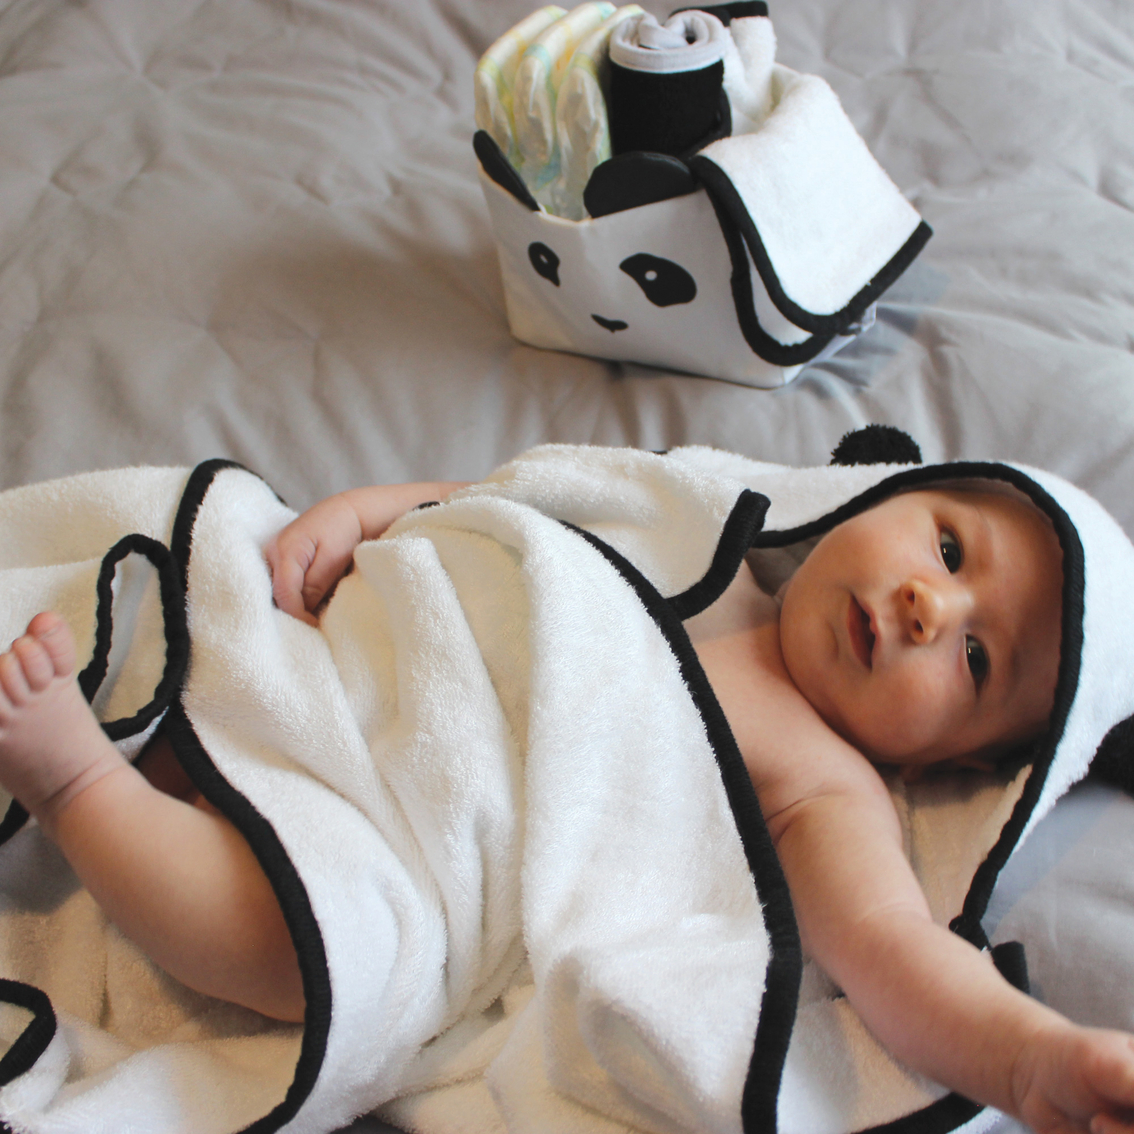 BedVoyage Comfort Essentials Hooded Towel, Swaddle and Washcloth 3 pc. Set - Image 3 of 8